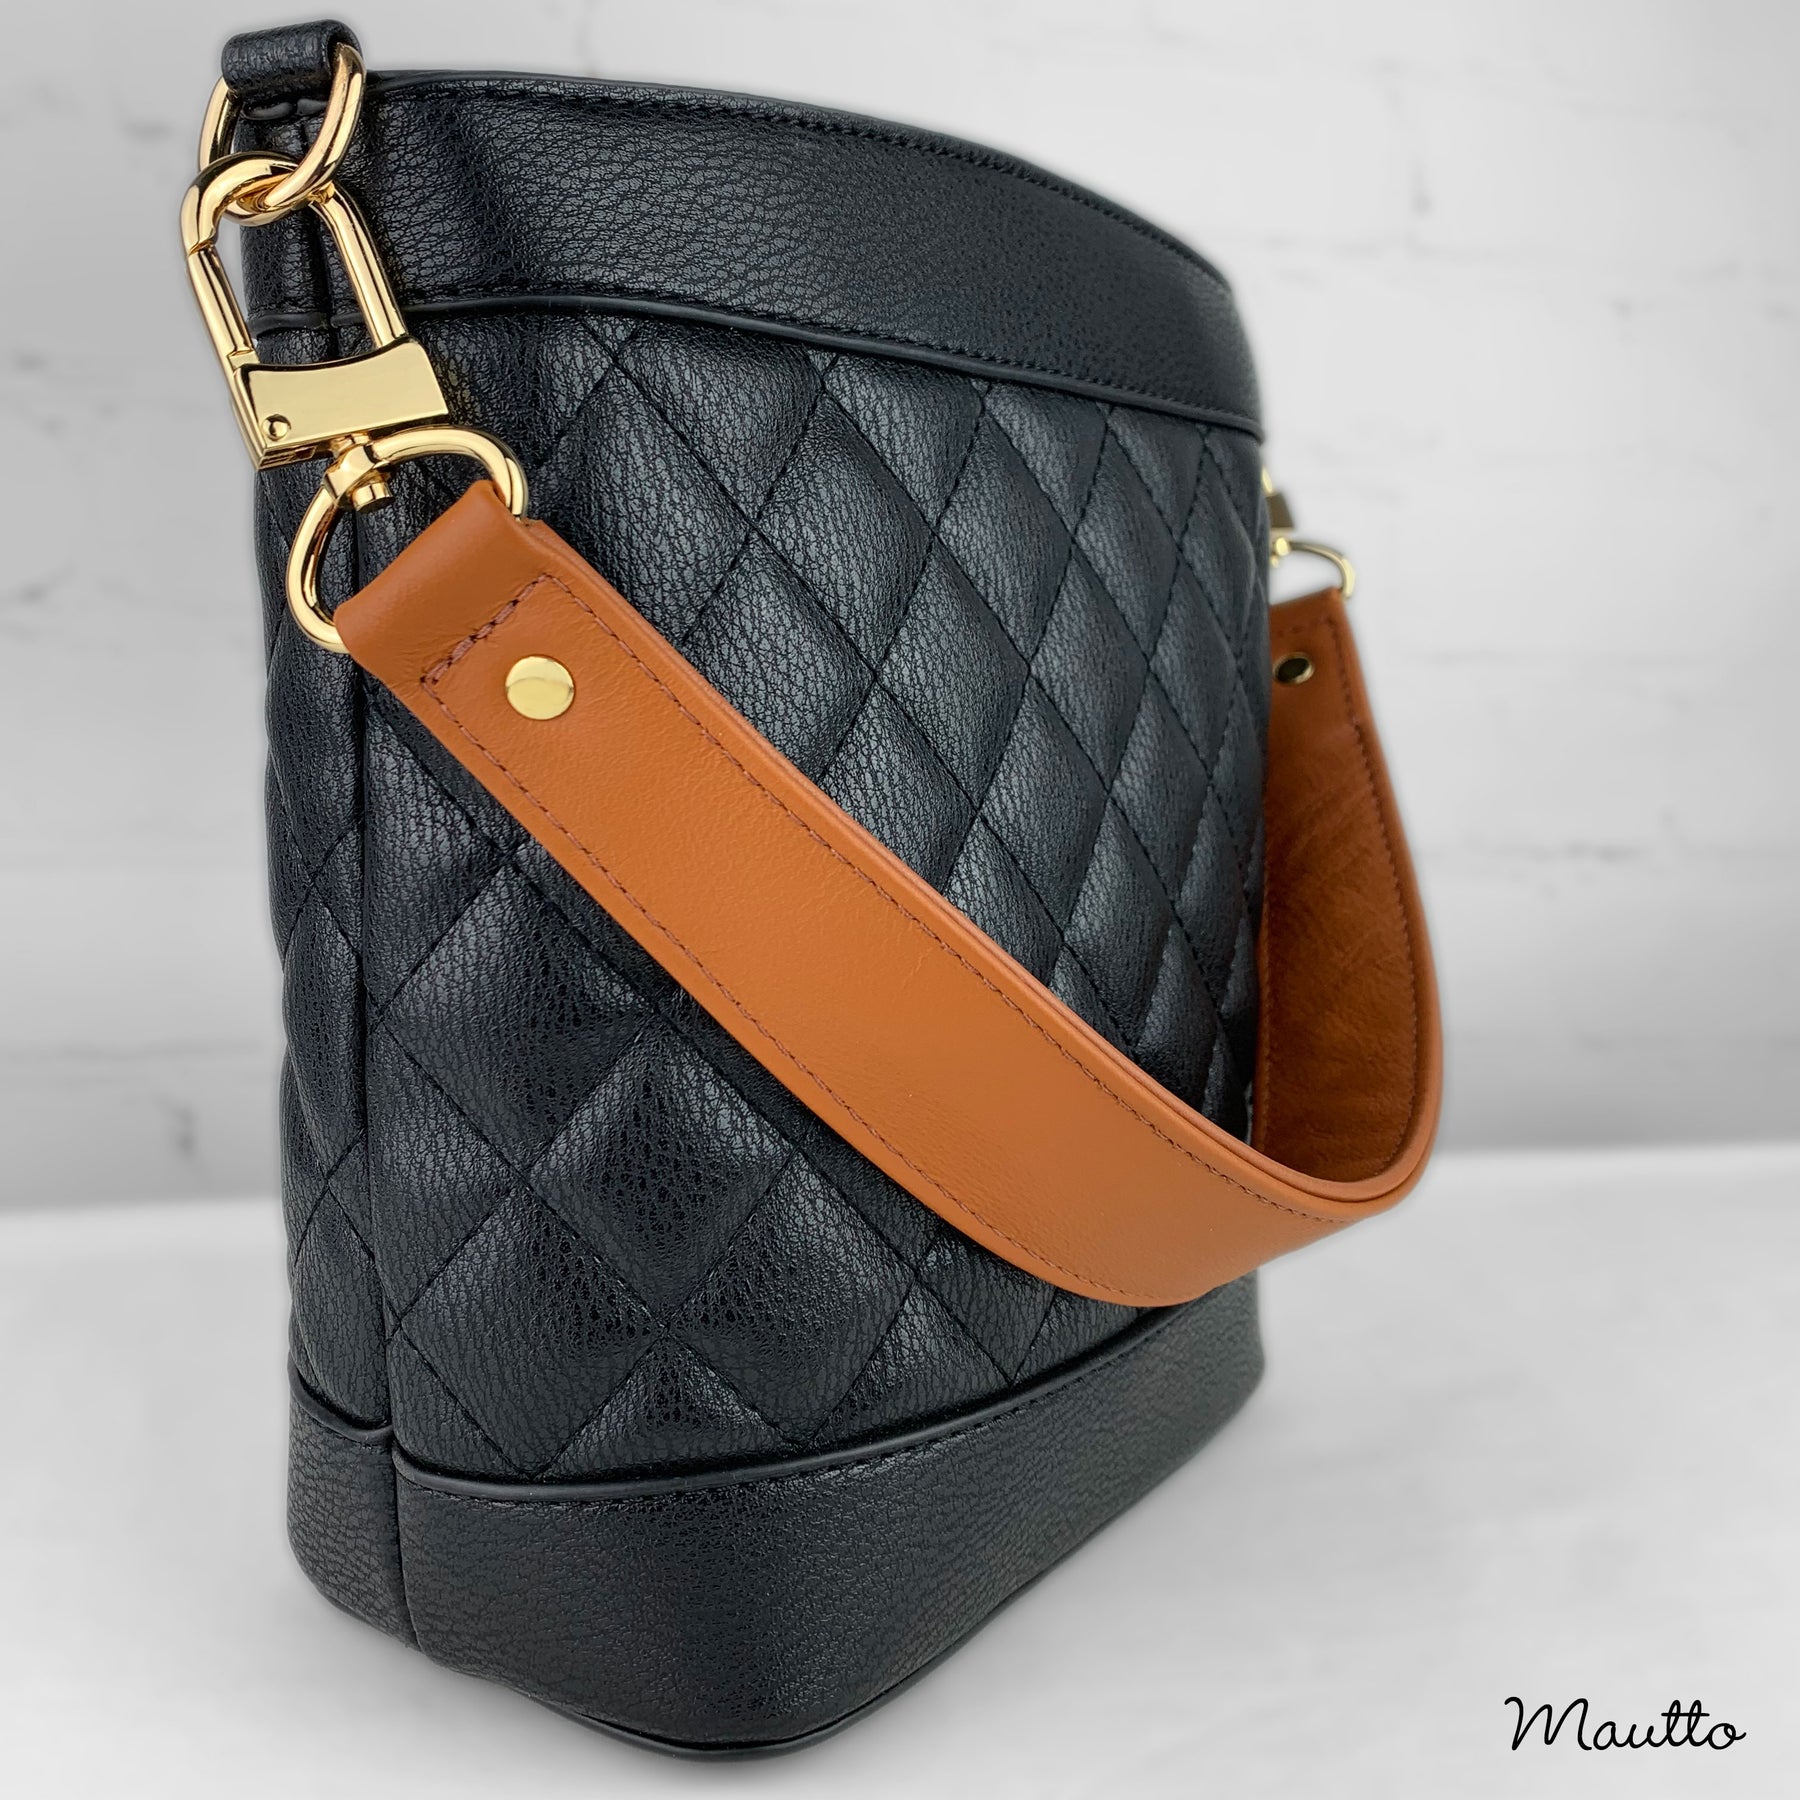 Top Handles - The Traditional Strap Style for Most Handbags - Mautto